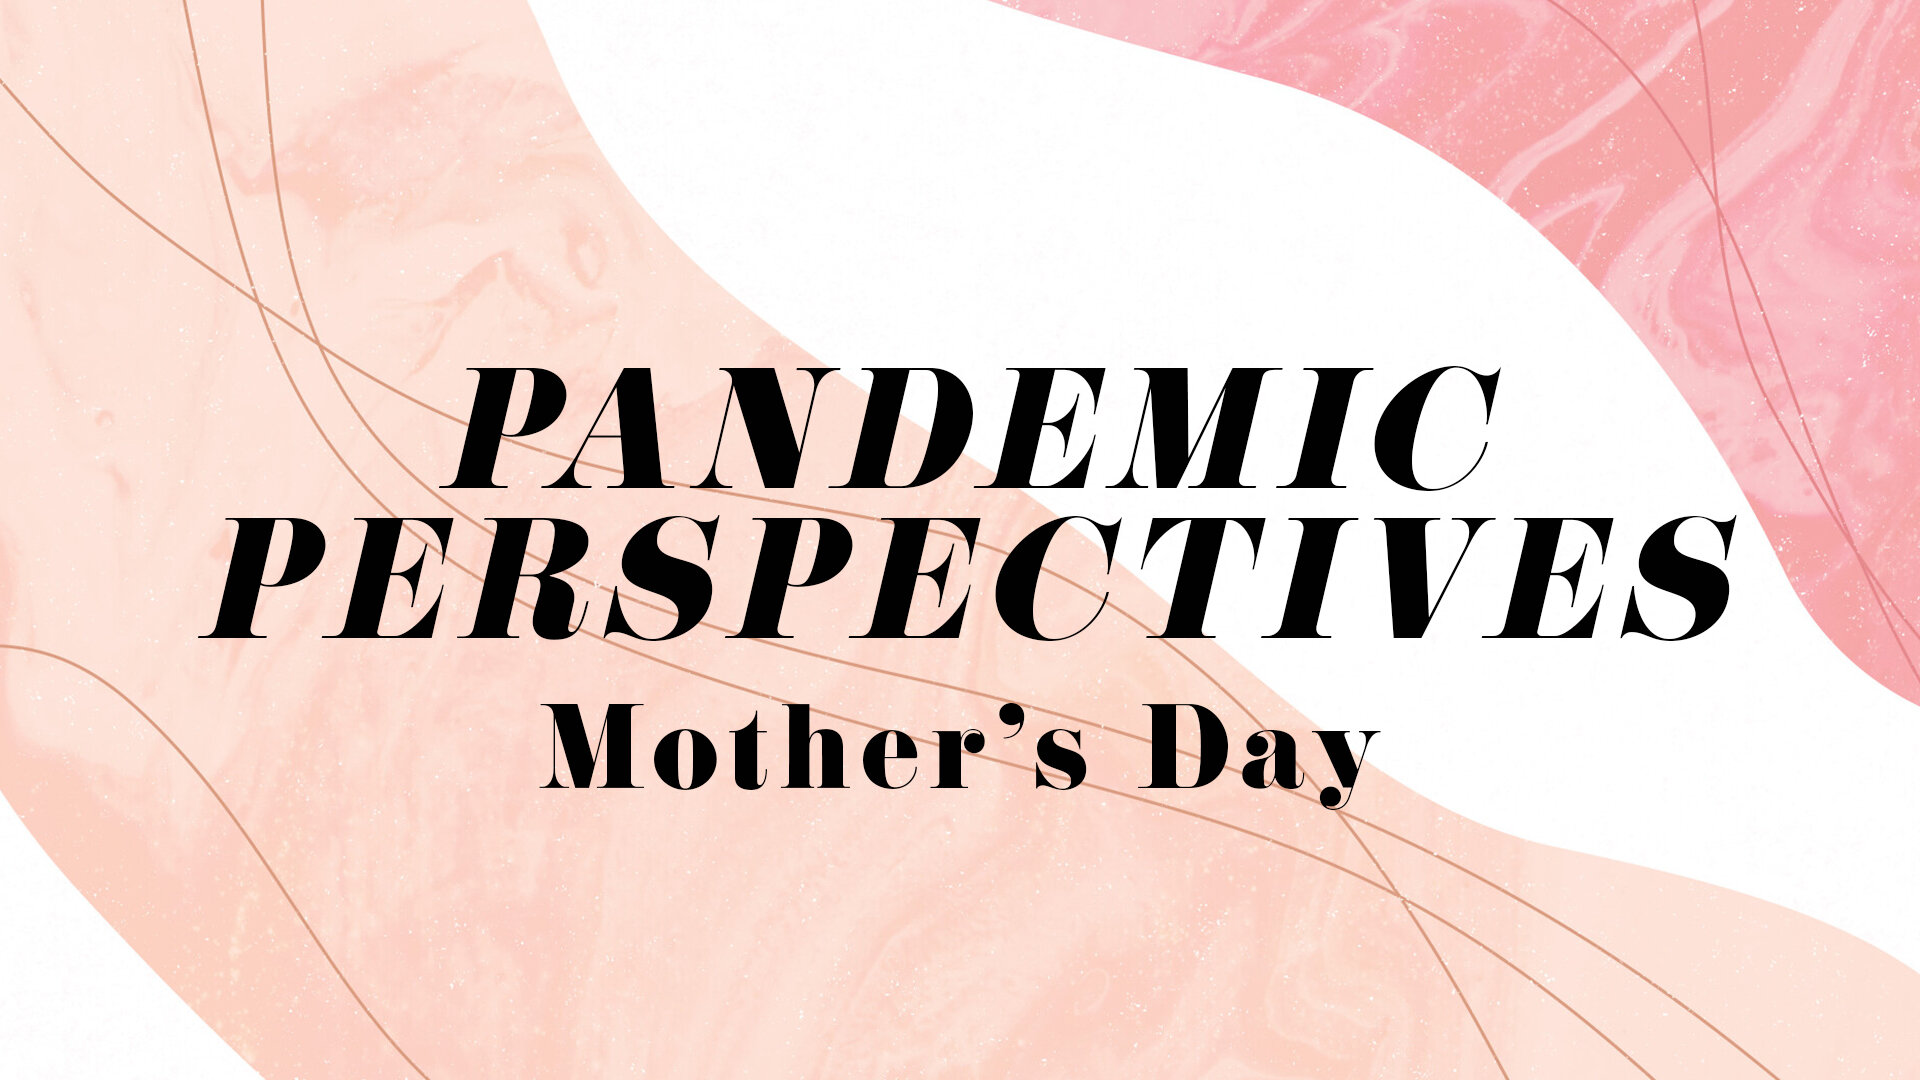 pandemicperspectives_mothersday.jpg